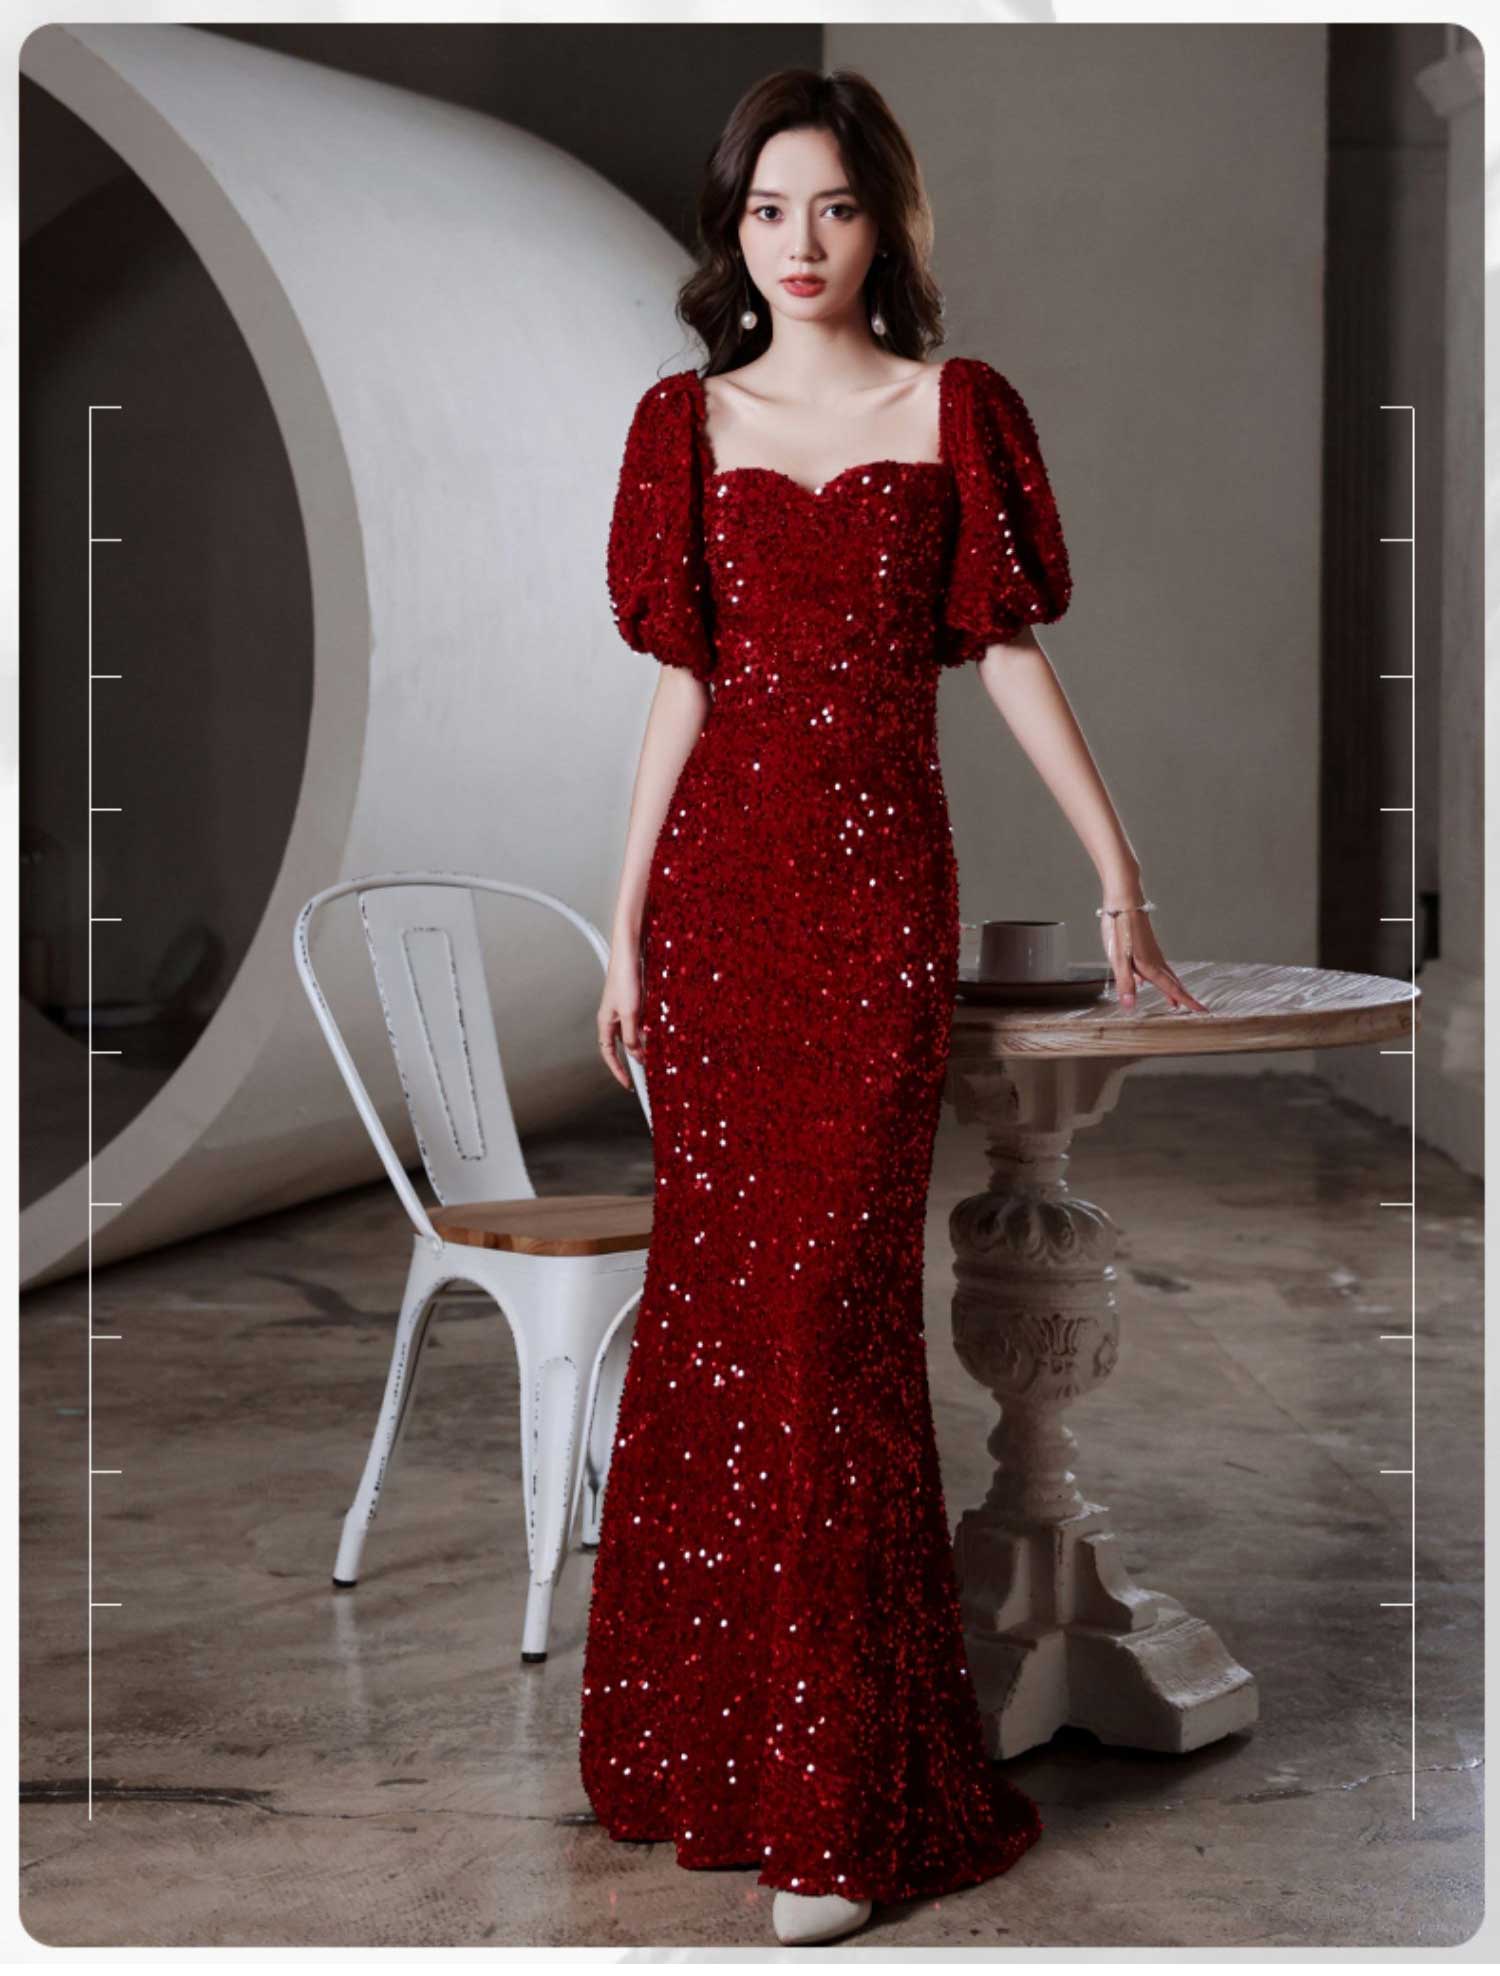 Fashion-Wine-Red-Sparkly-Evening-Party-Dress-Elegant-Ball-Gown07